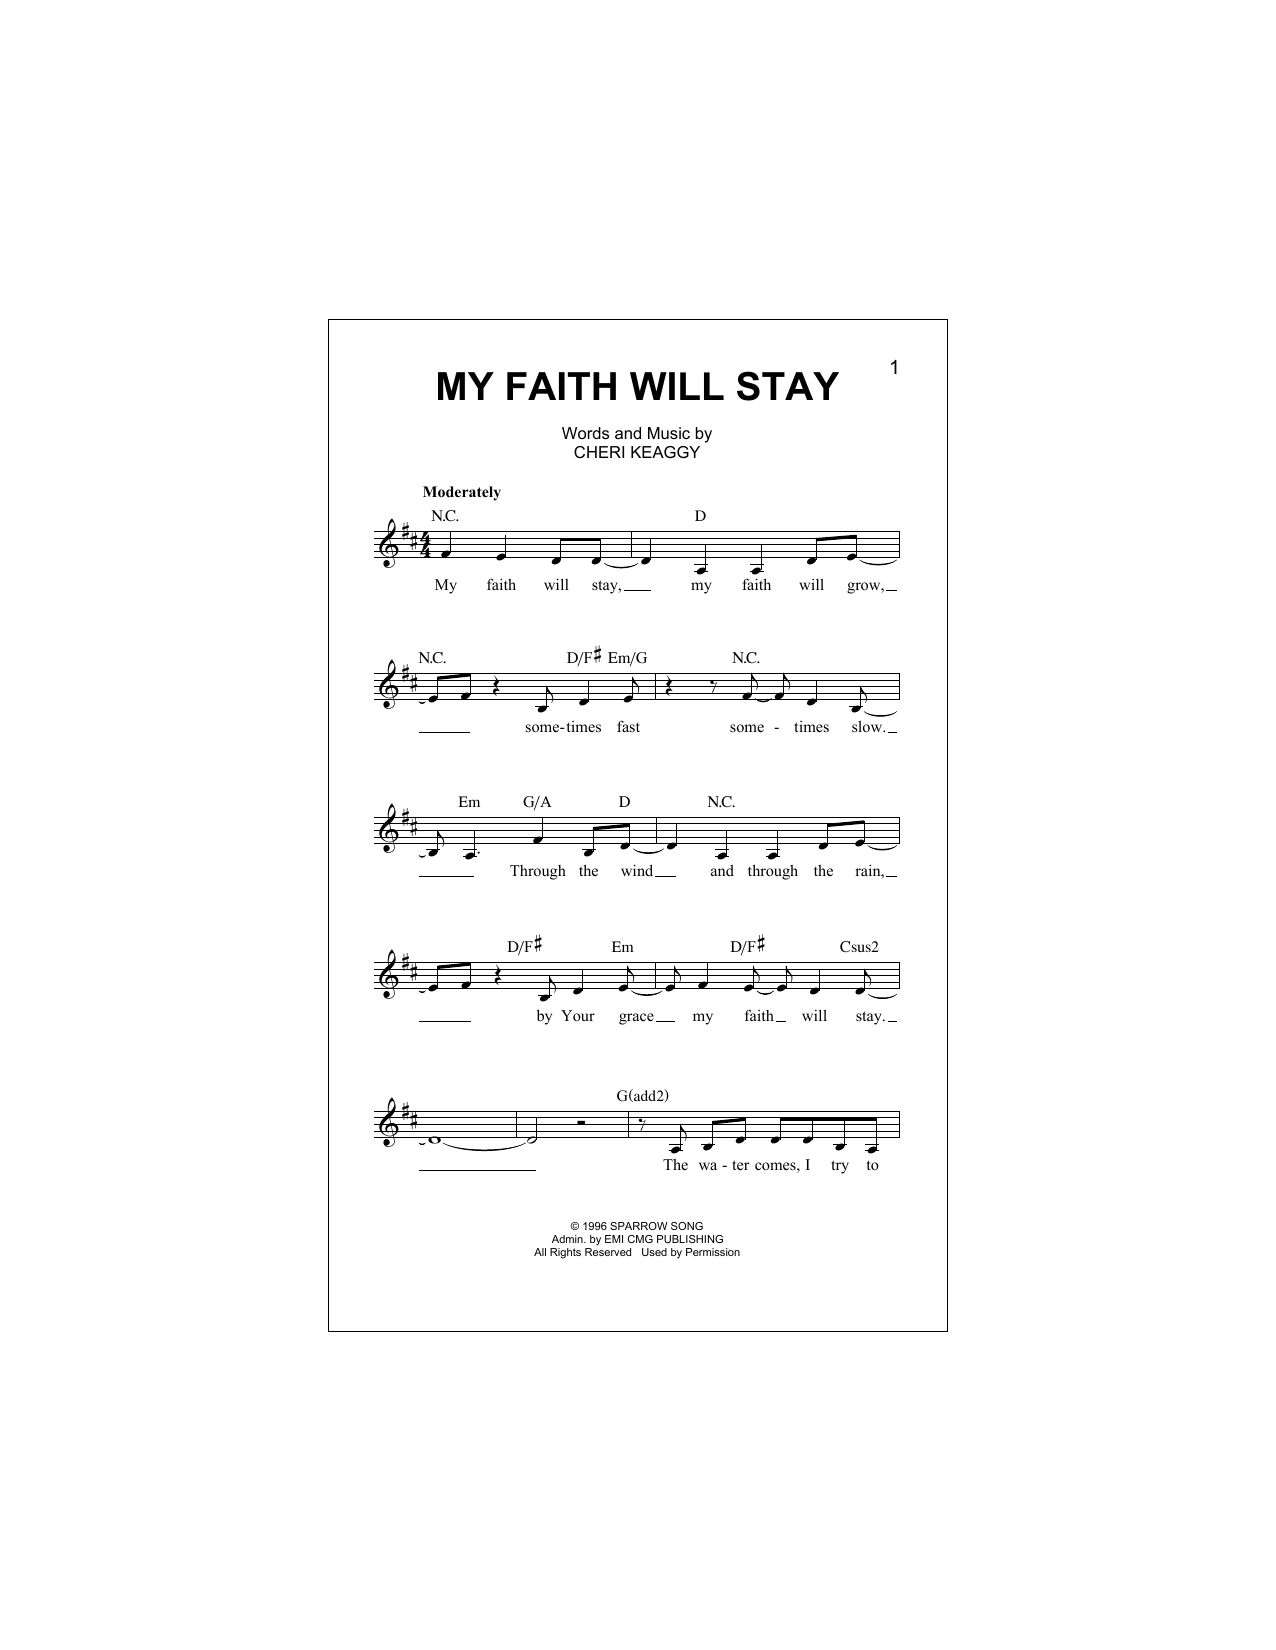 Download Cheri Keaggy My Faith Will Stay Sheet Music